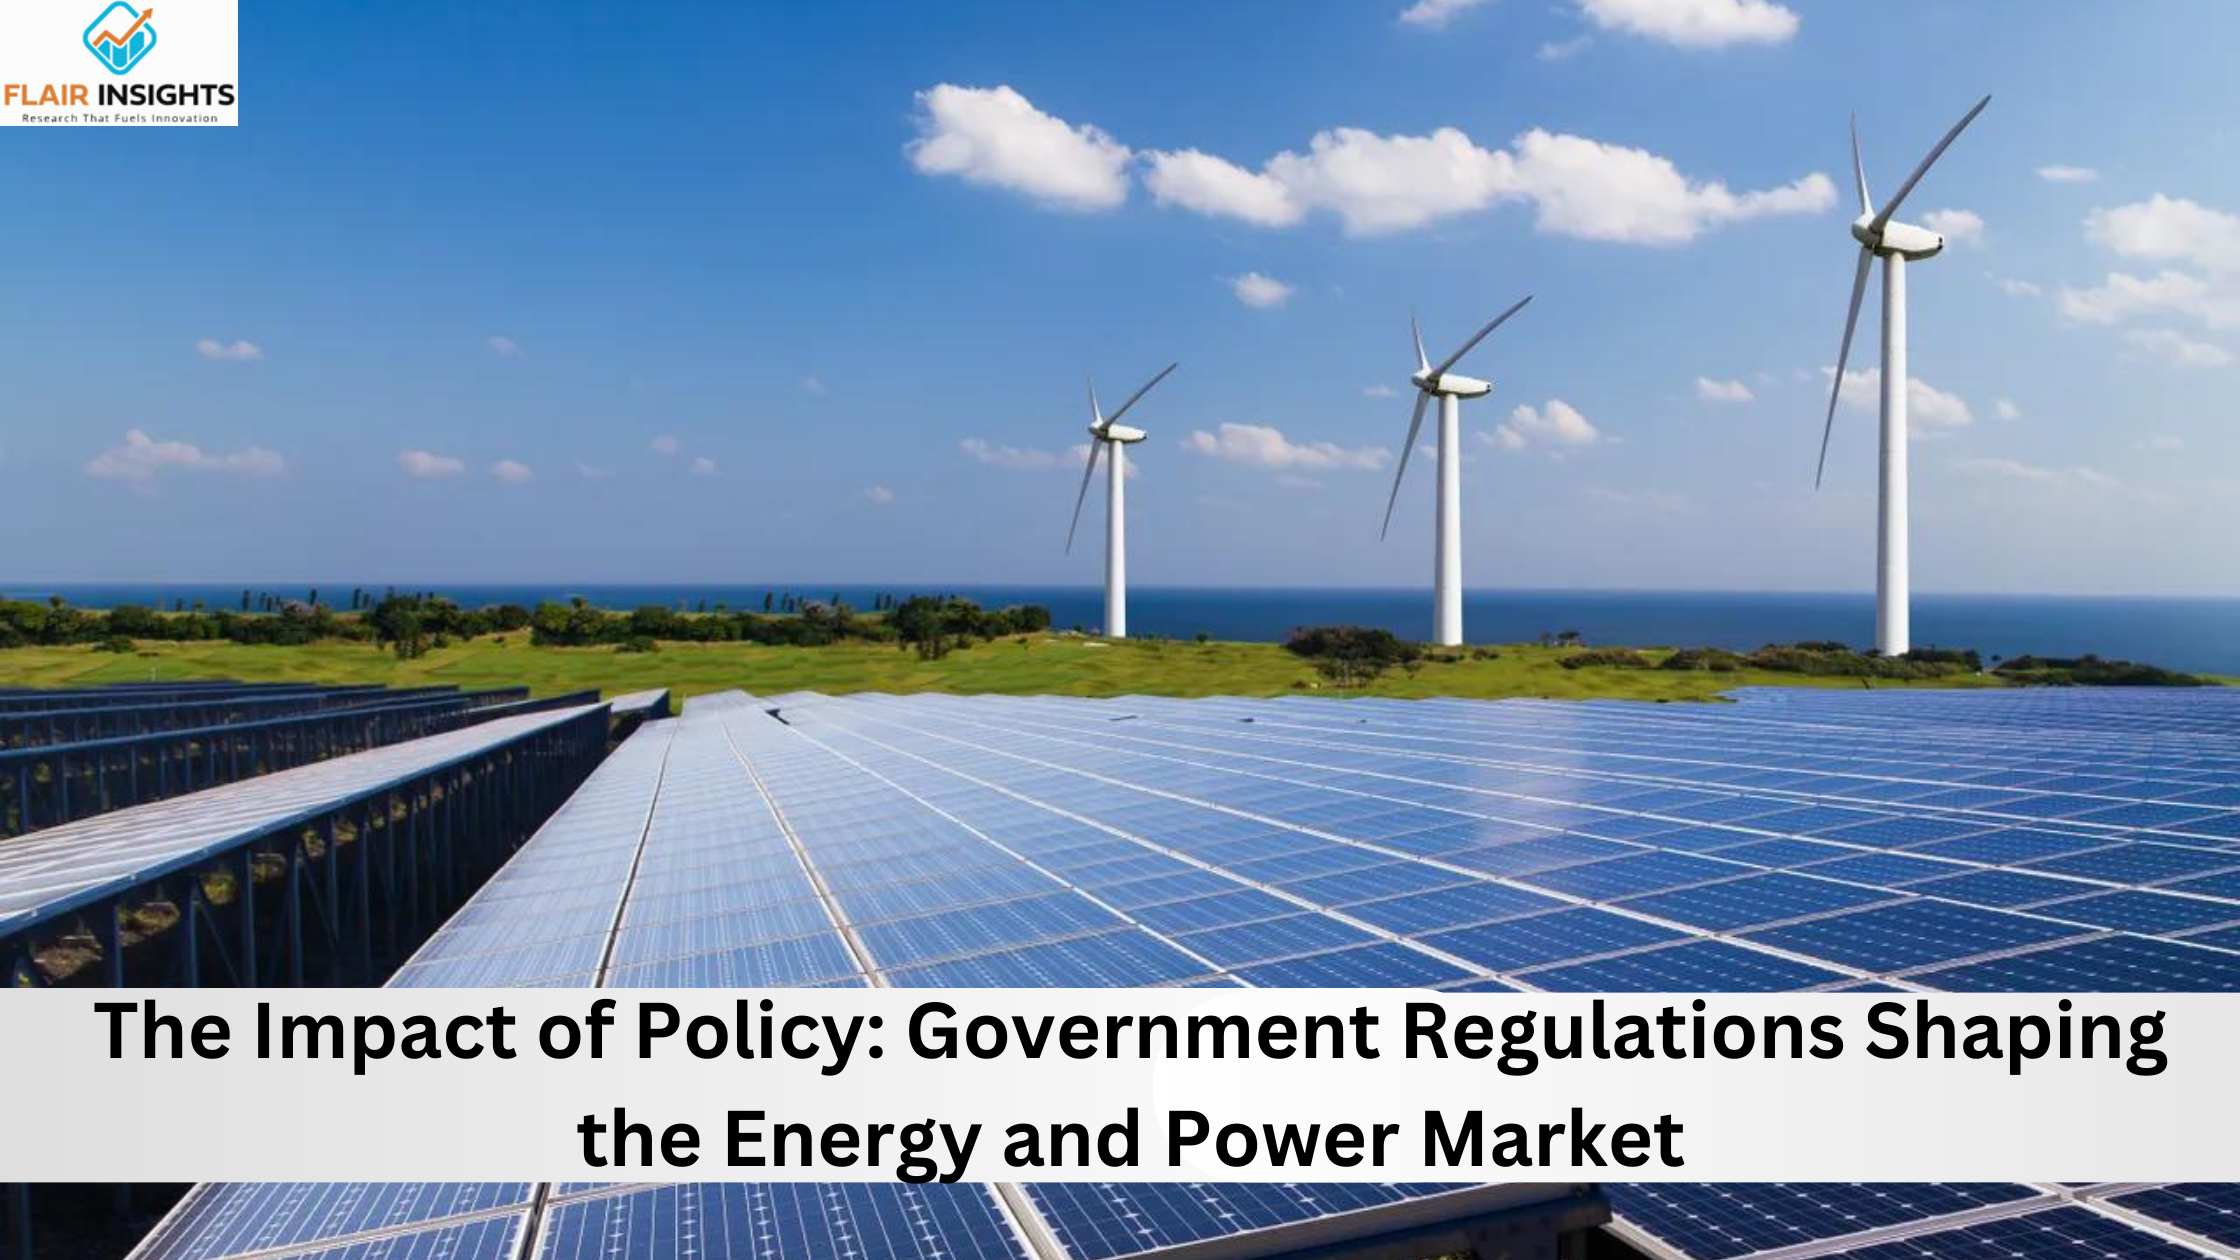 The Impact of Policy: Government Regulations Shaping the Energy and Power Market